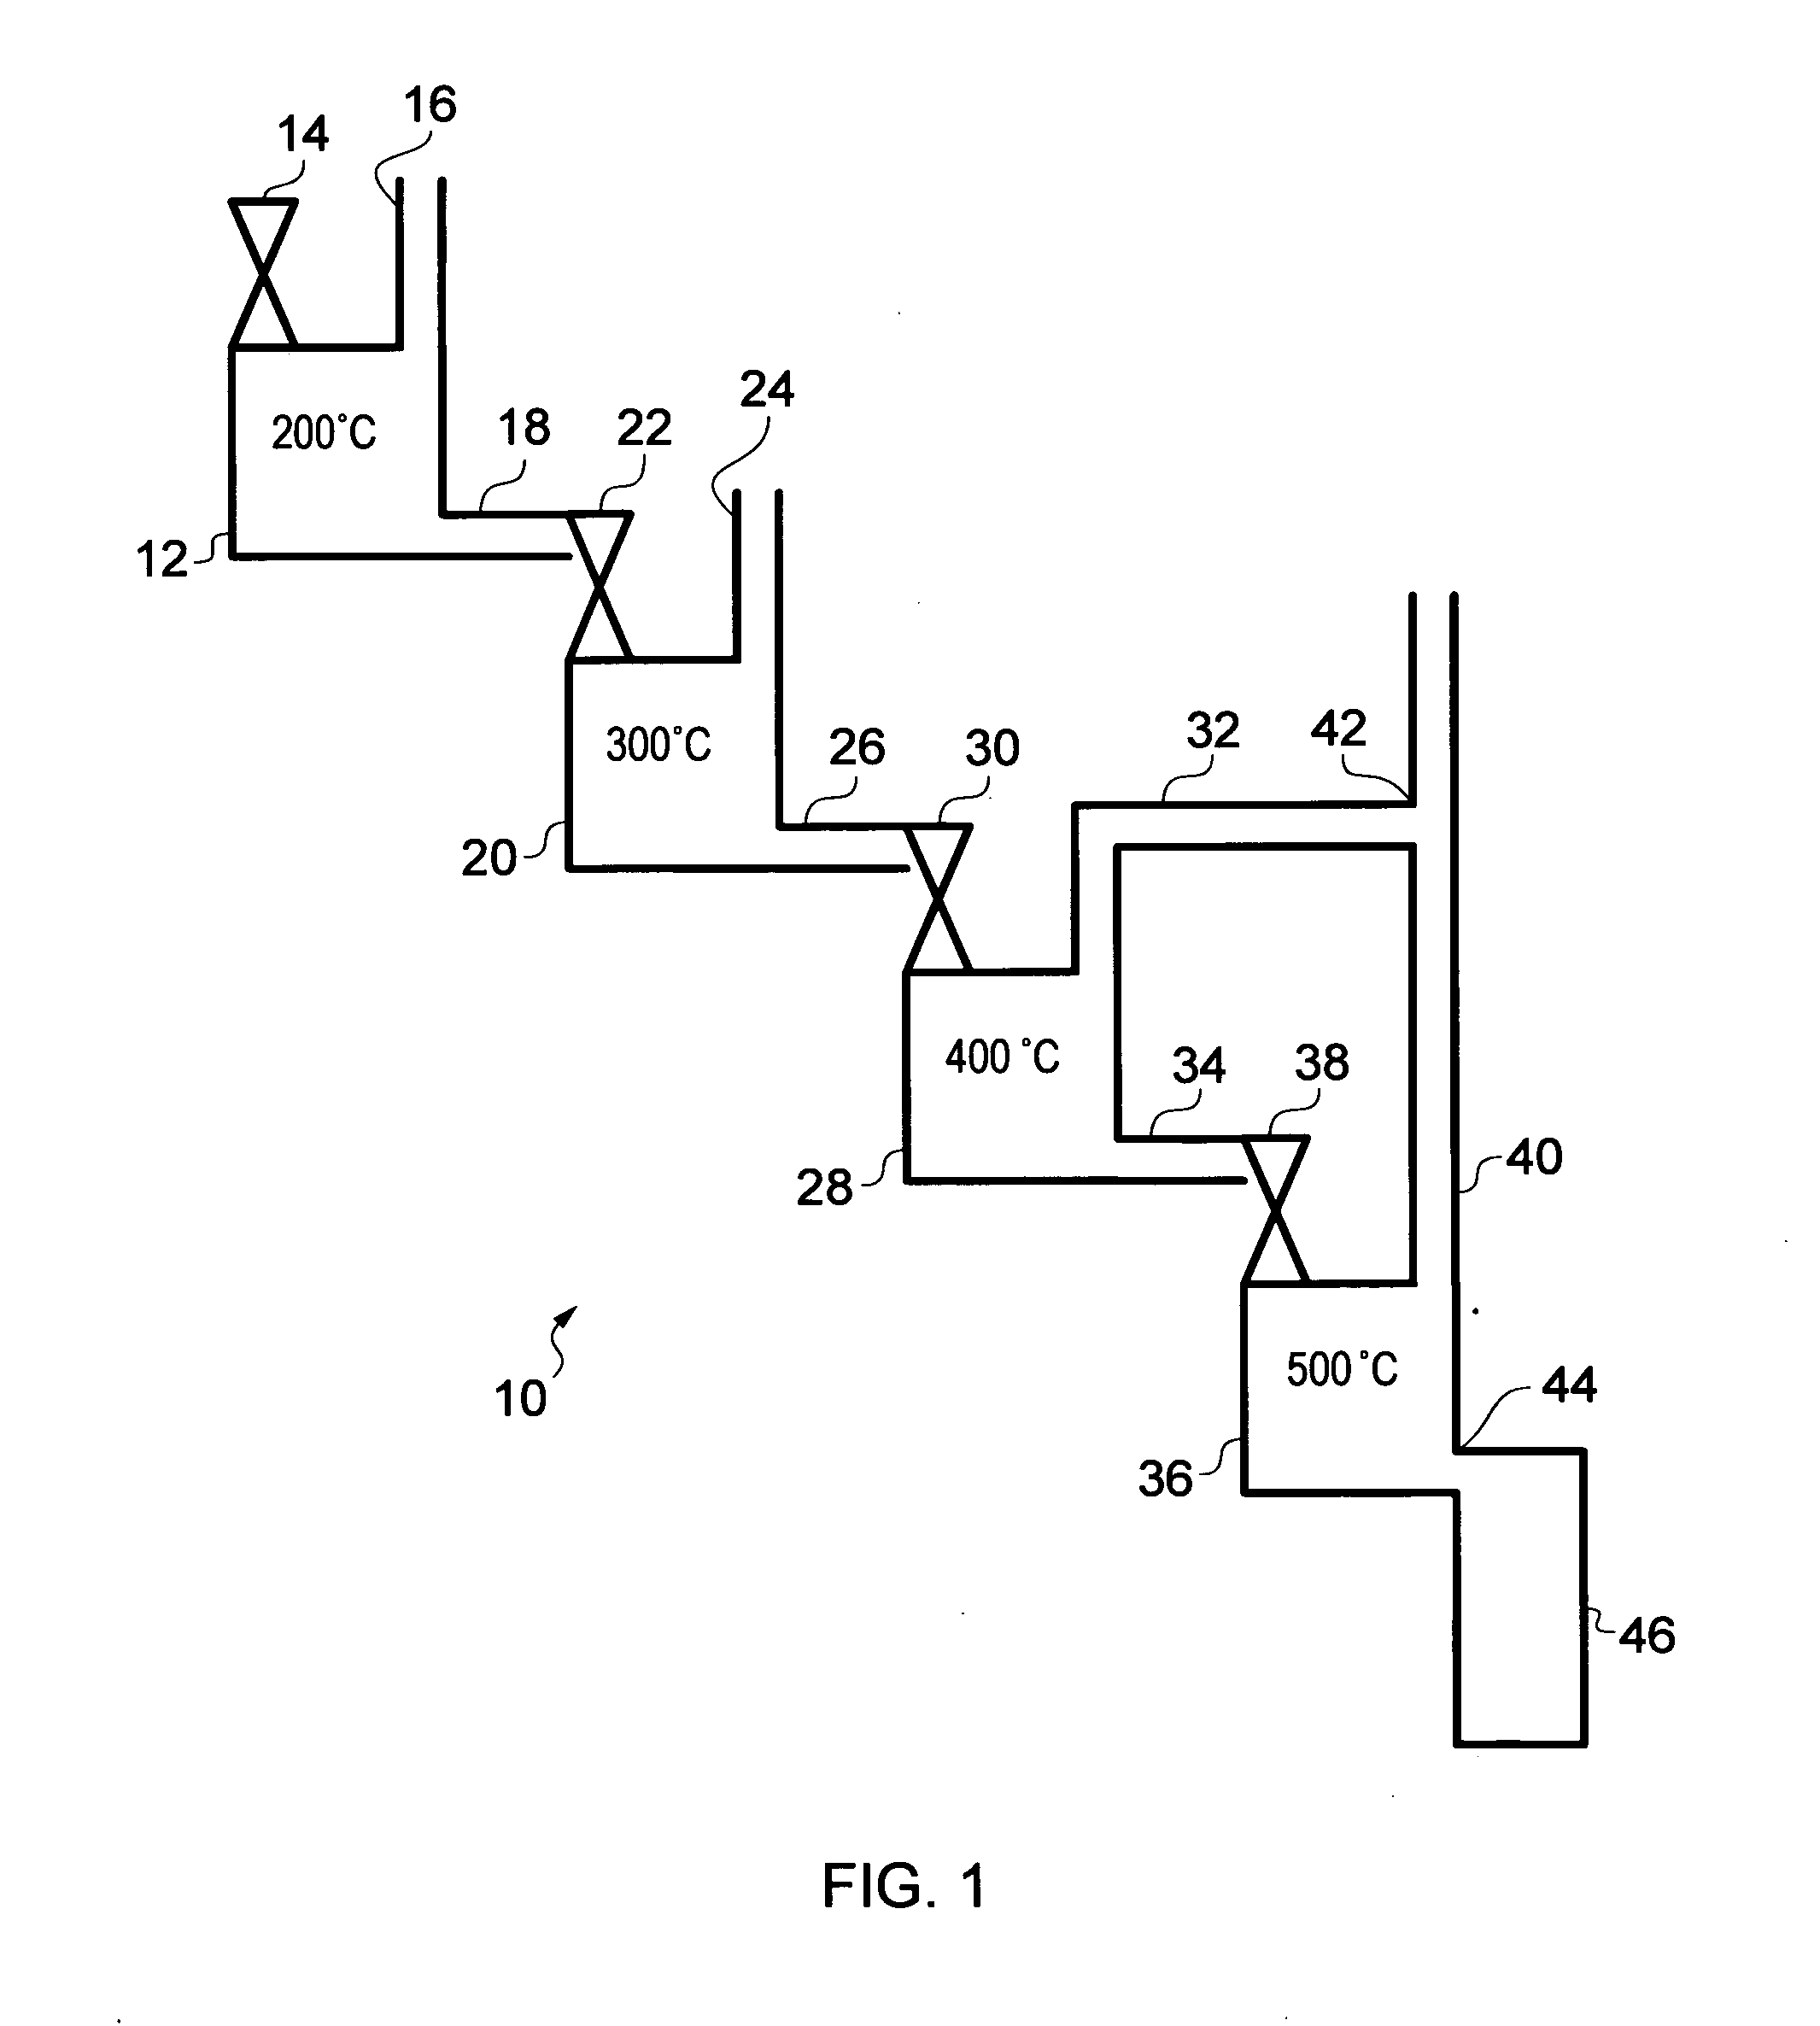 Staged biomass pyrolysis process and apparatus